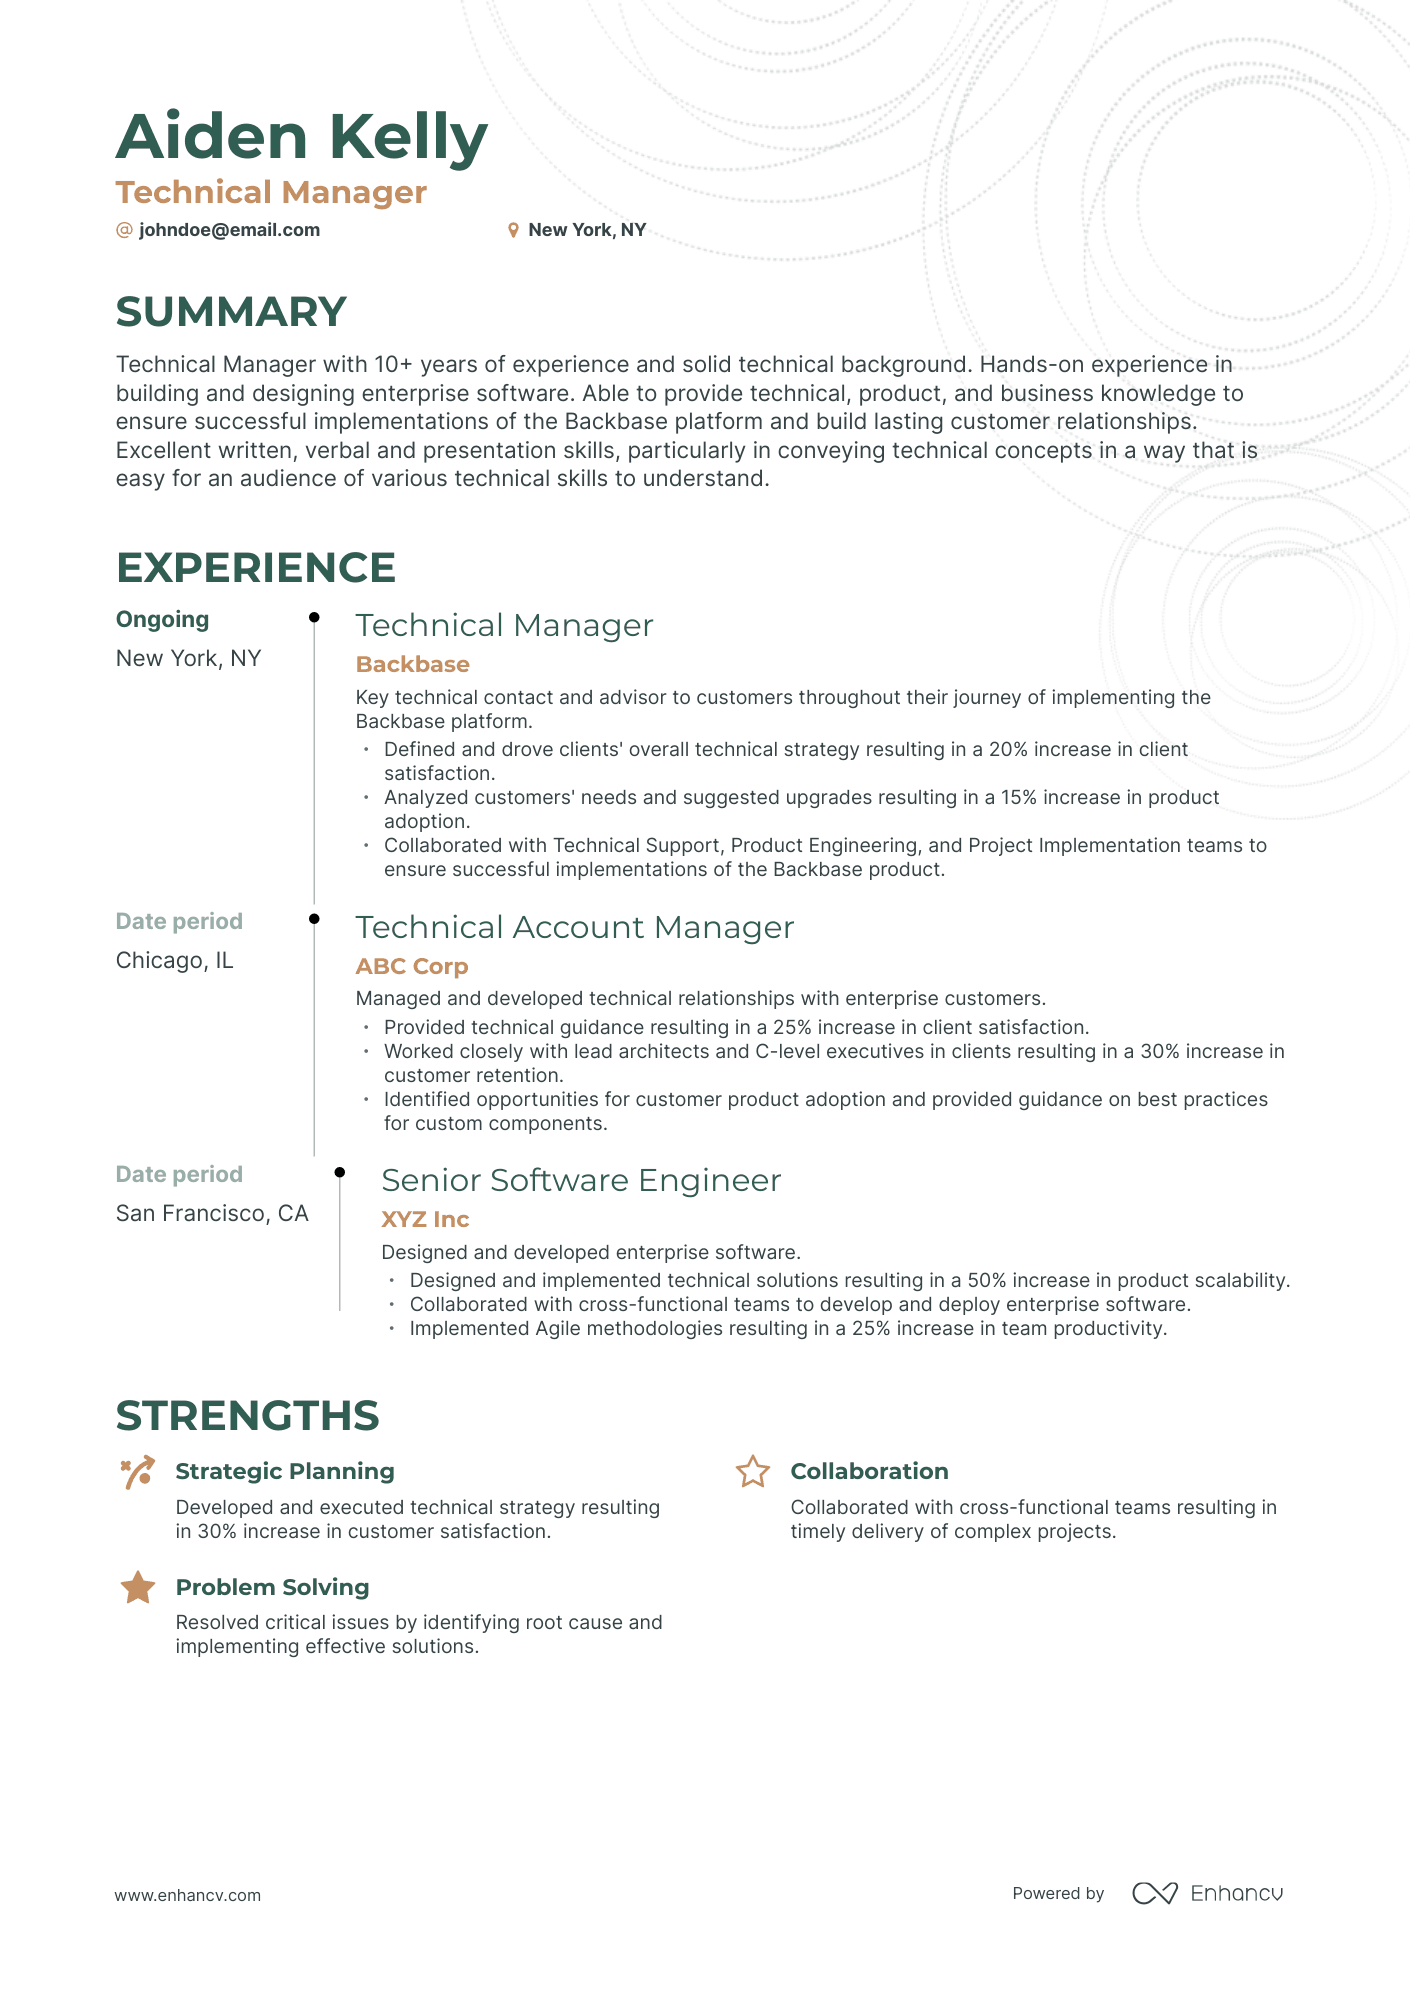 Timeline Technical Manager Resume Template